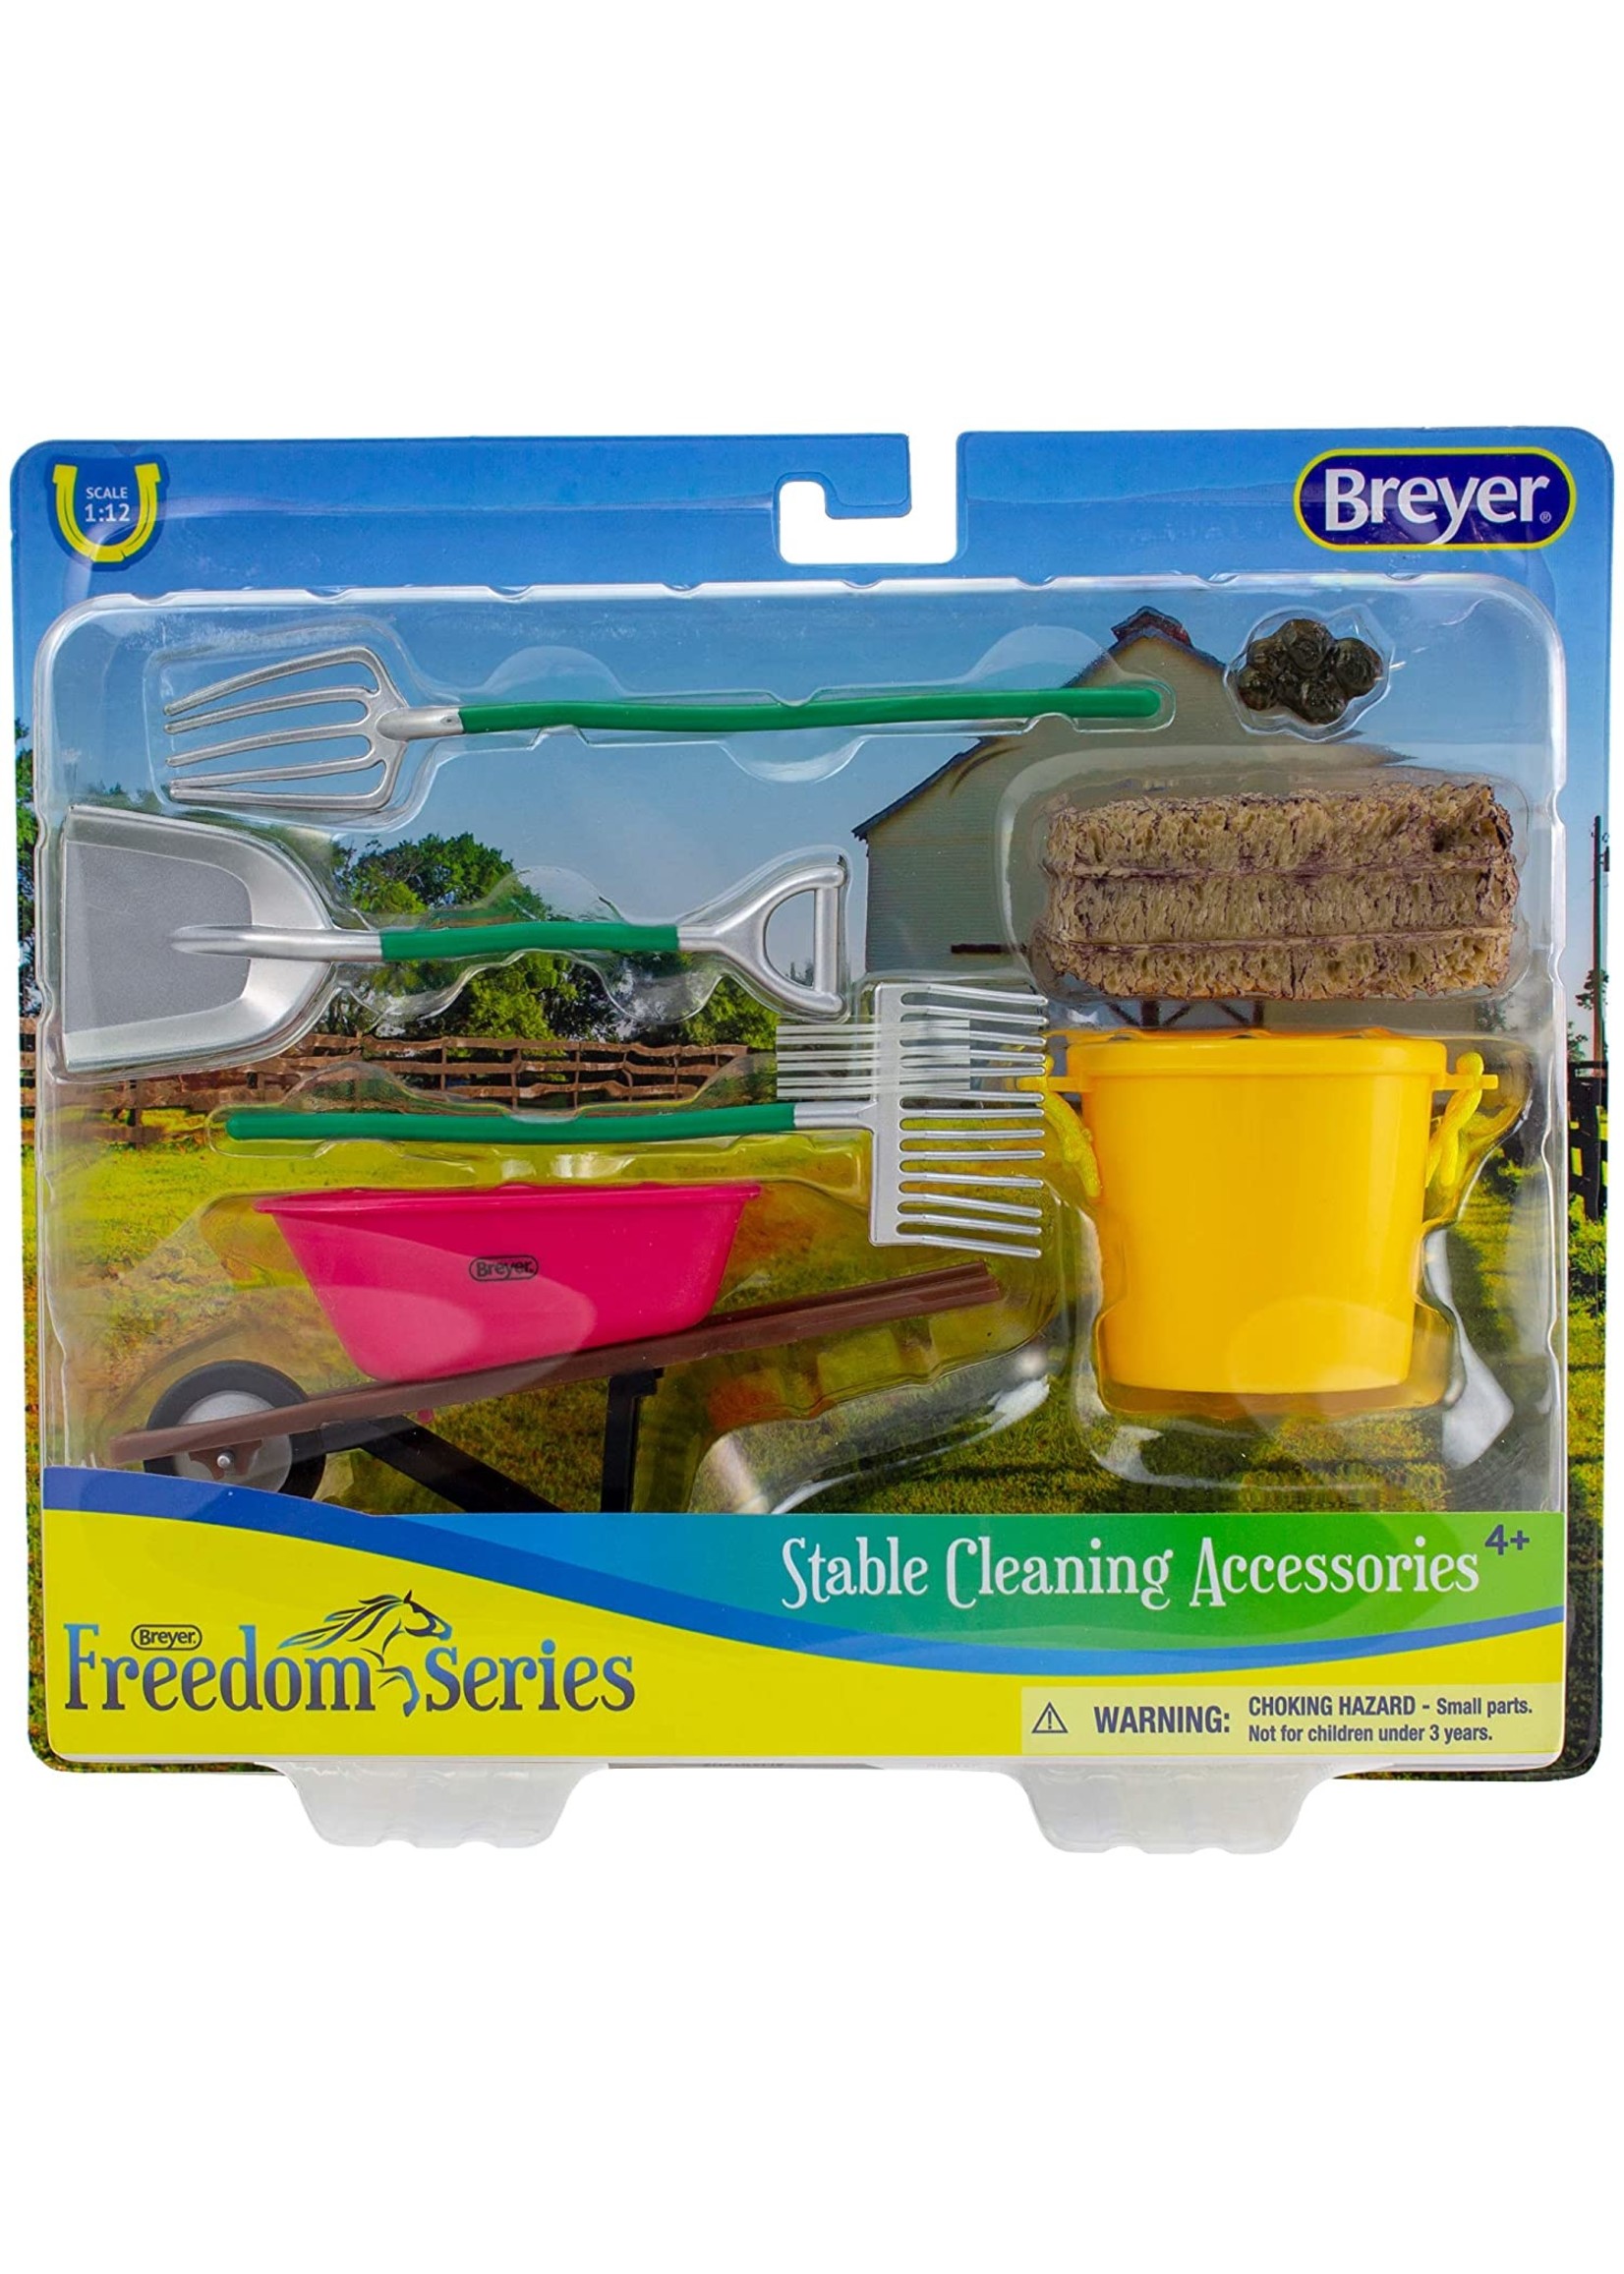 Breyer Stable Cleaning Accessories /4